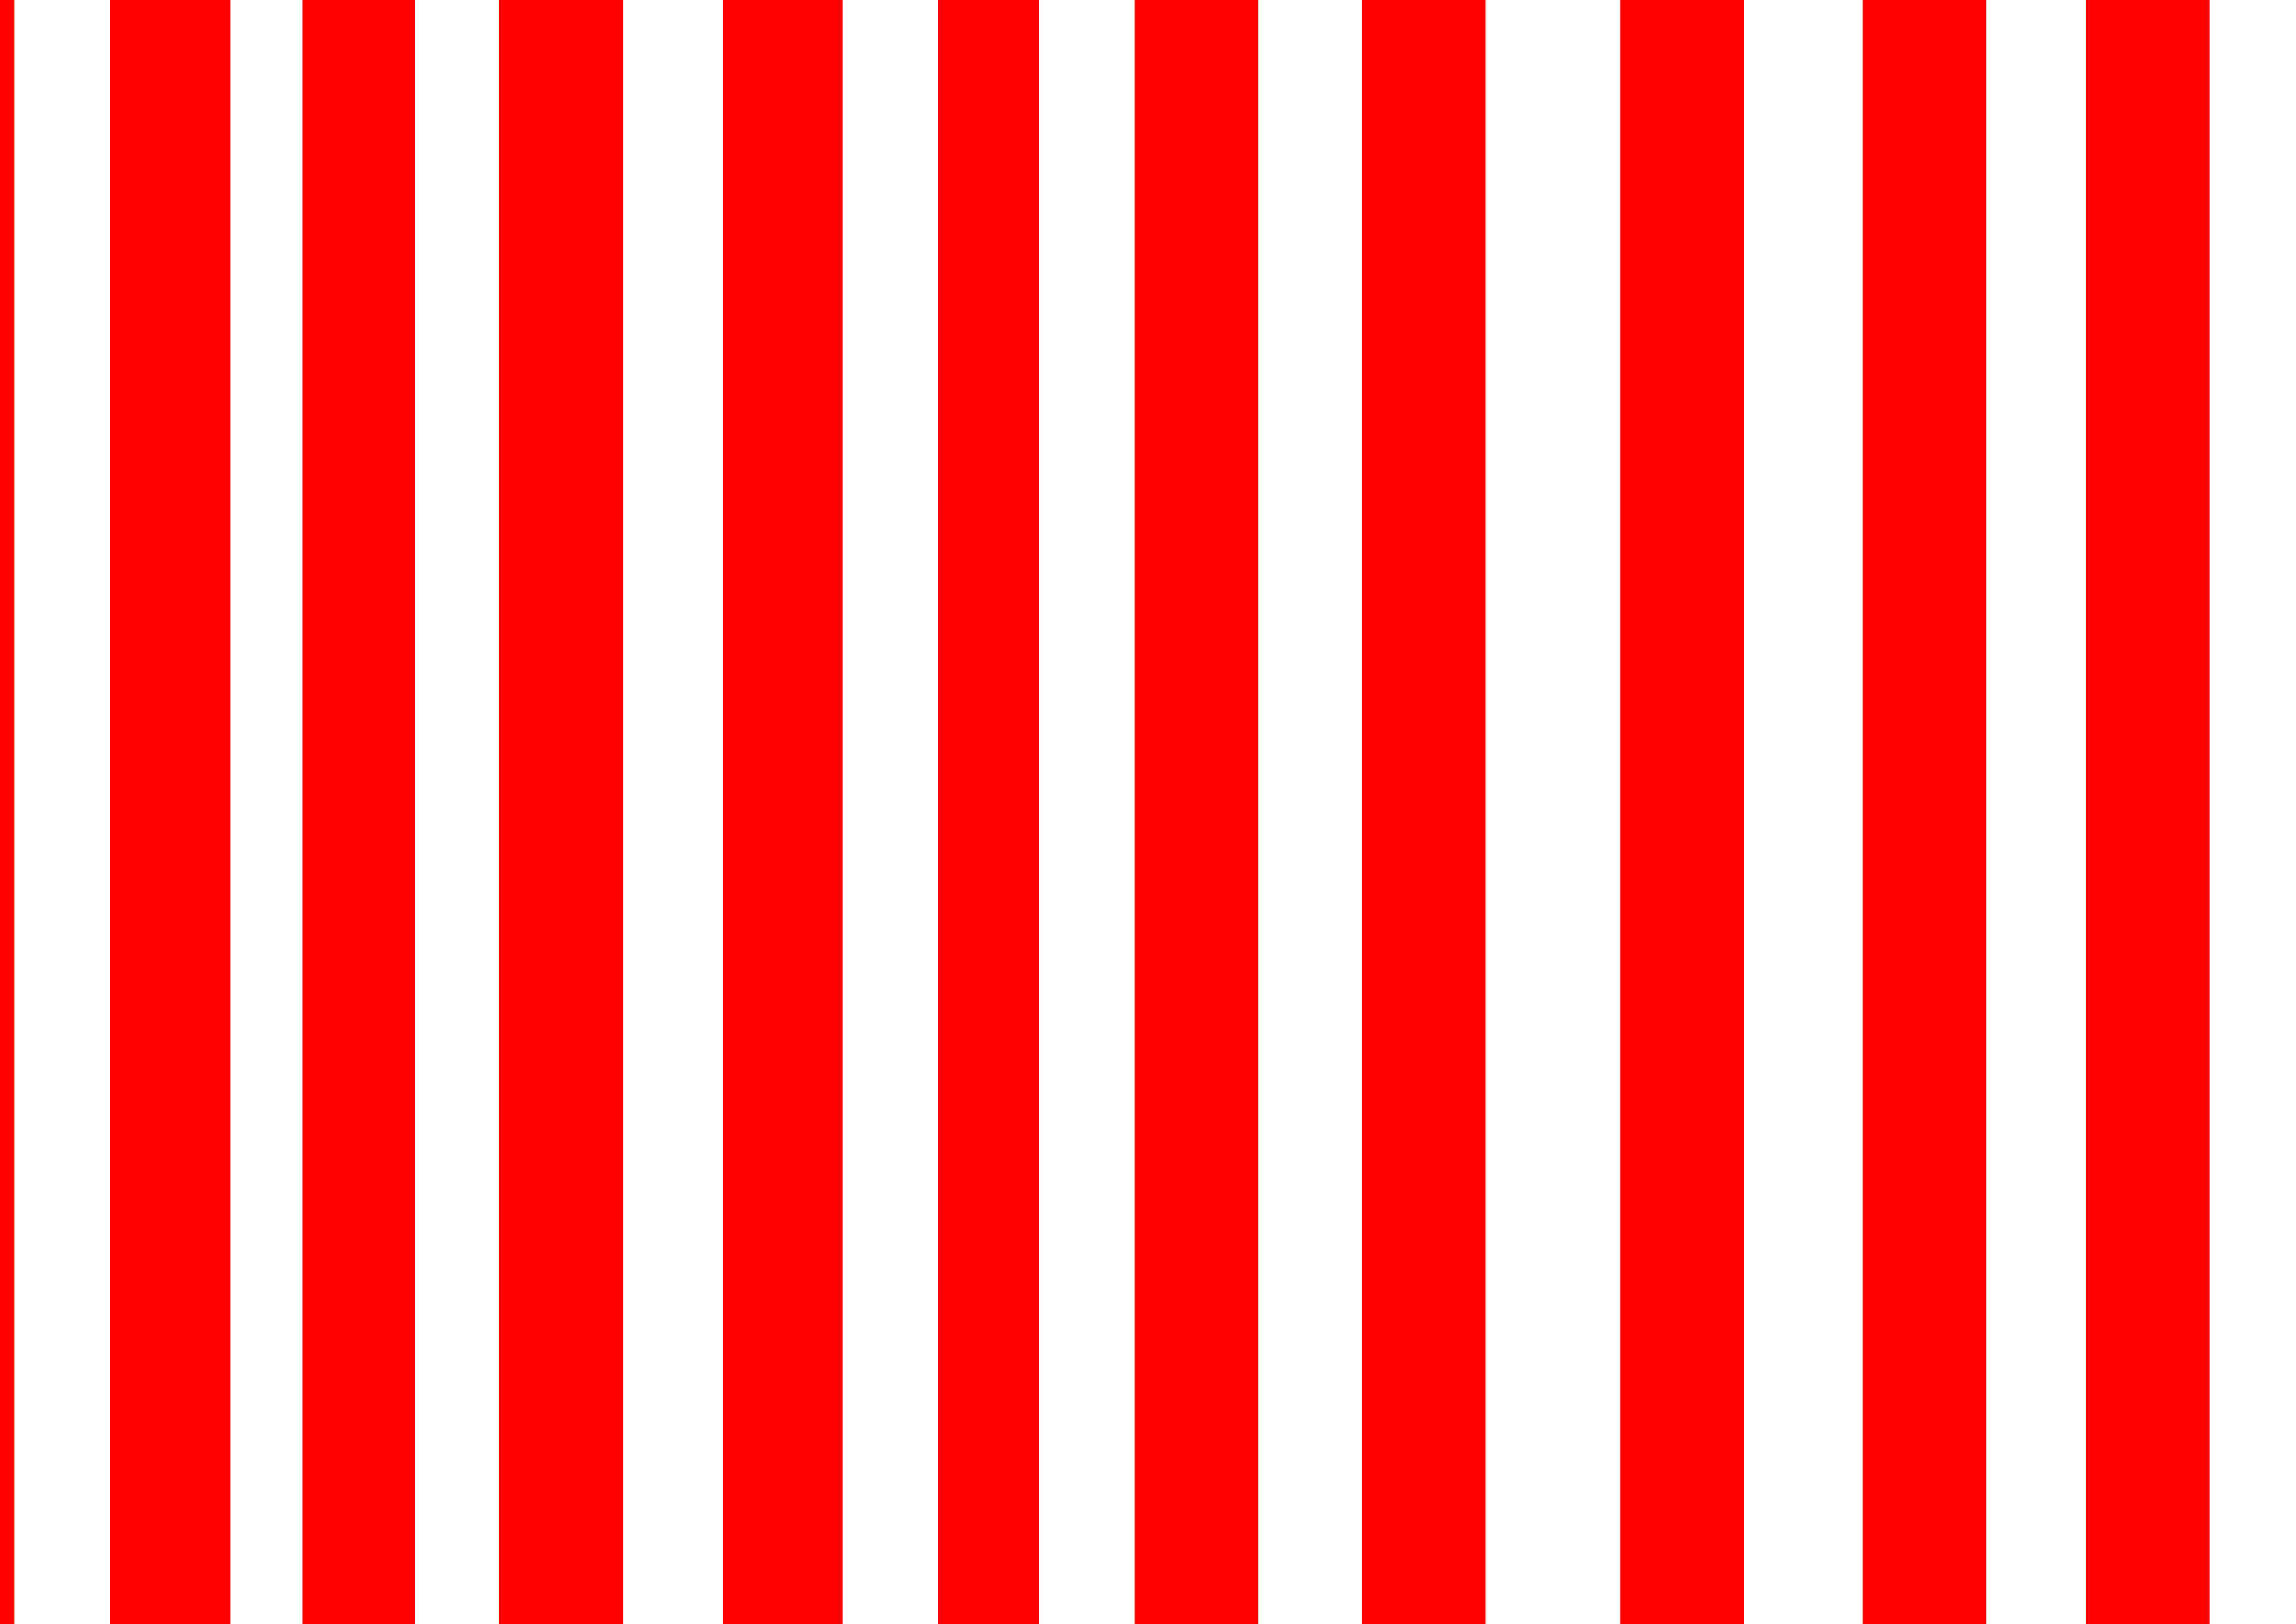 50+] Red and White Striped Wallpaper - WallpaperSafari